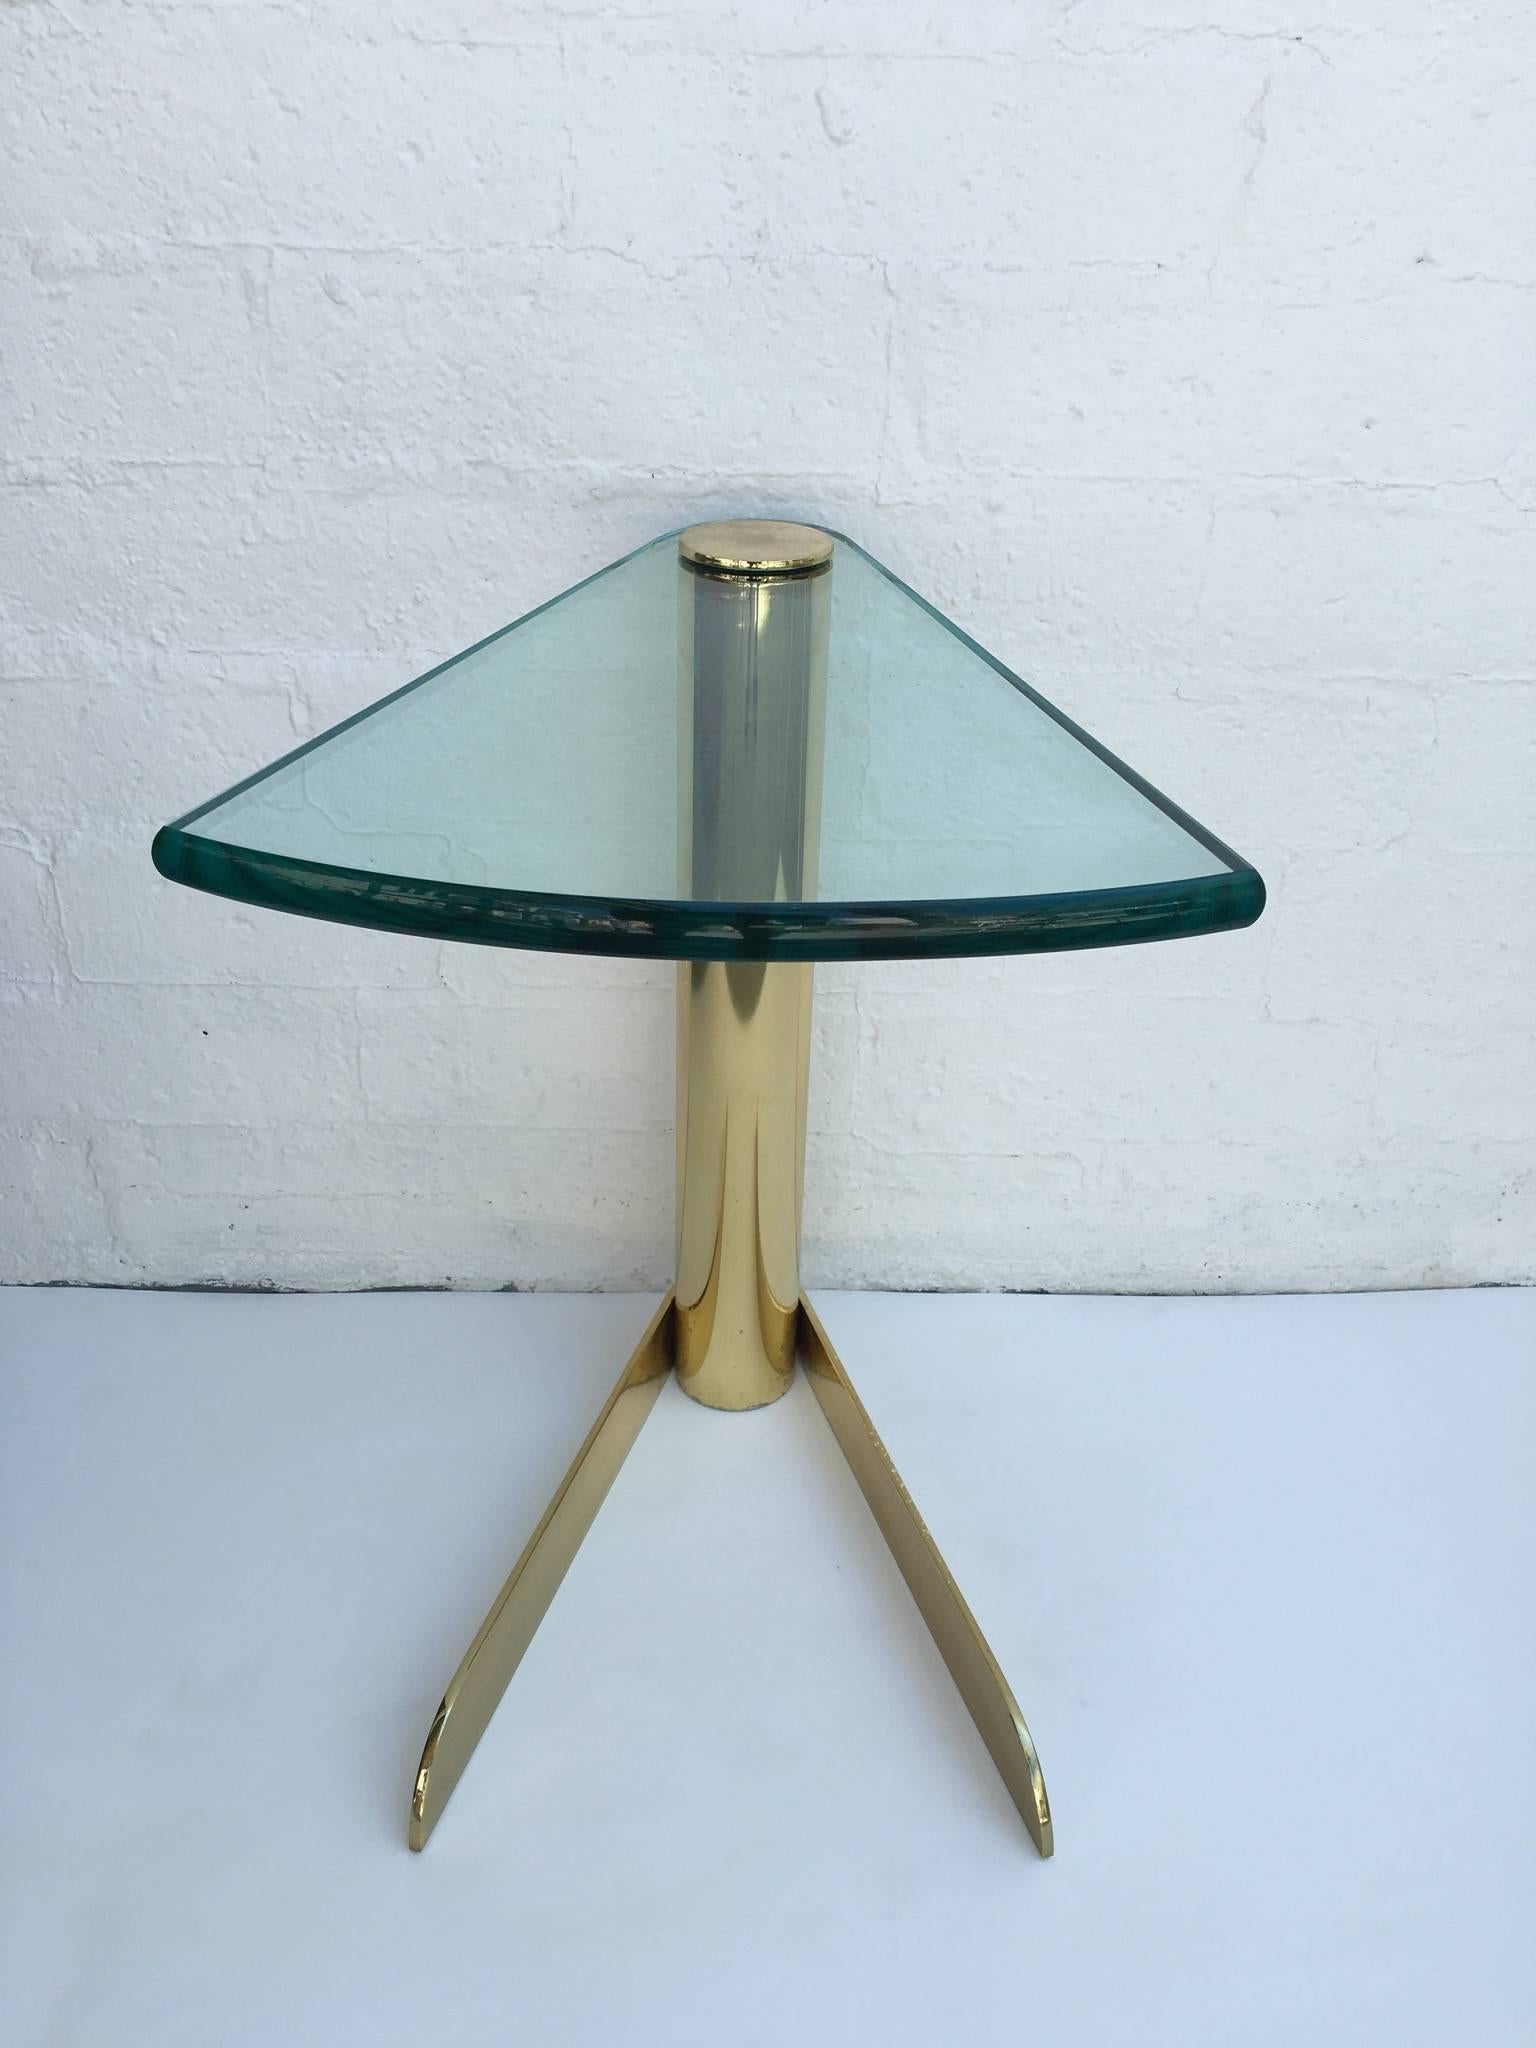 A glamorous brass and glass 1970s occasional table by Pace Collection.
The top is a 3/4